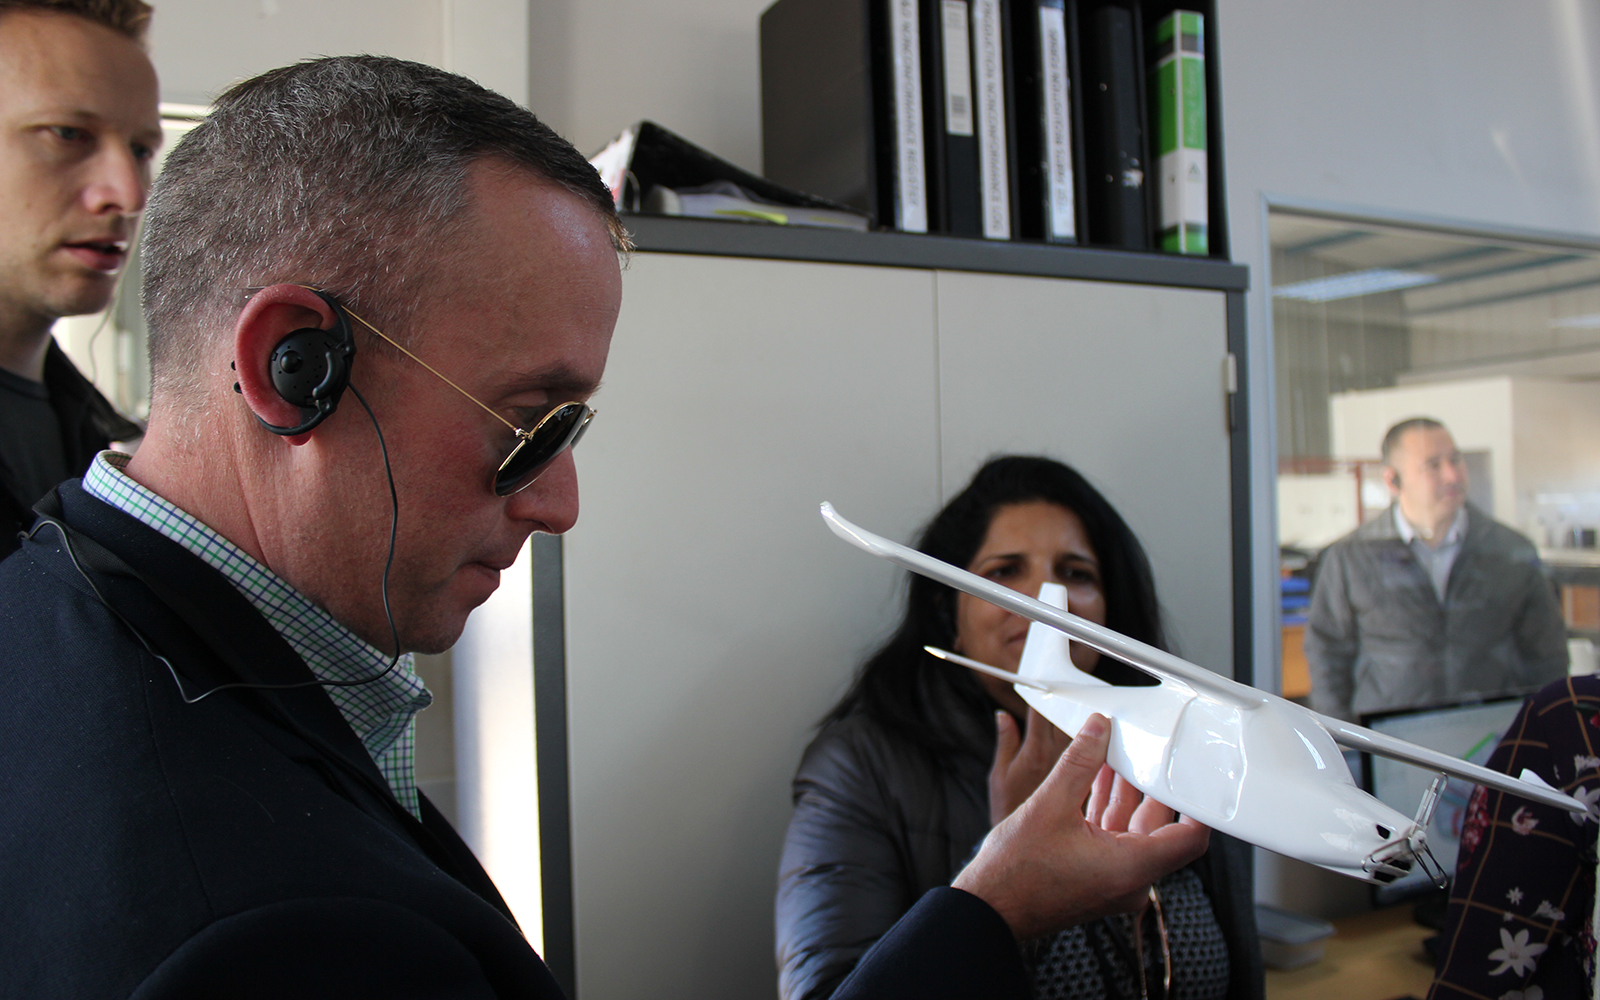 Chuck Daly (EMBA ’20) reviews a model at The Airplane Factory in the outskirts of Johannesburg.